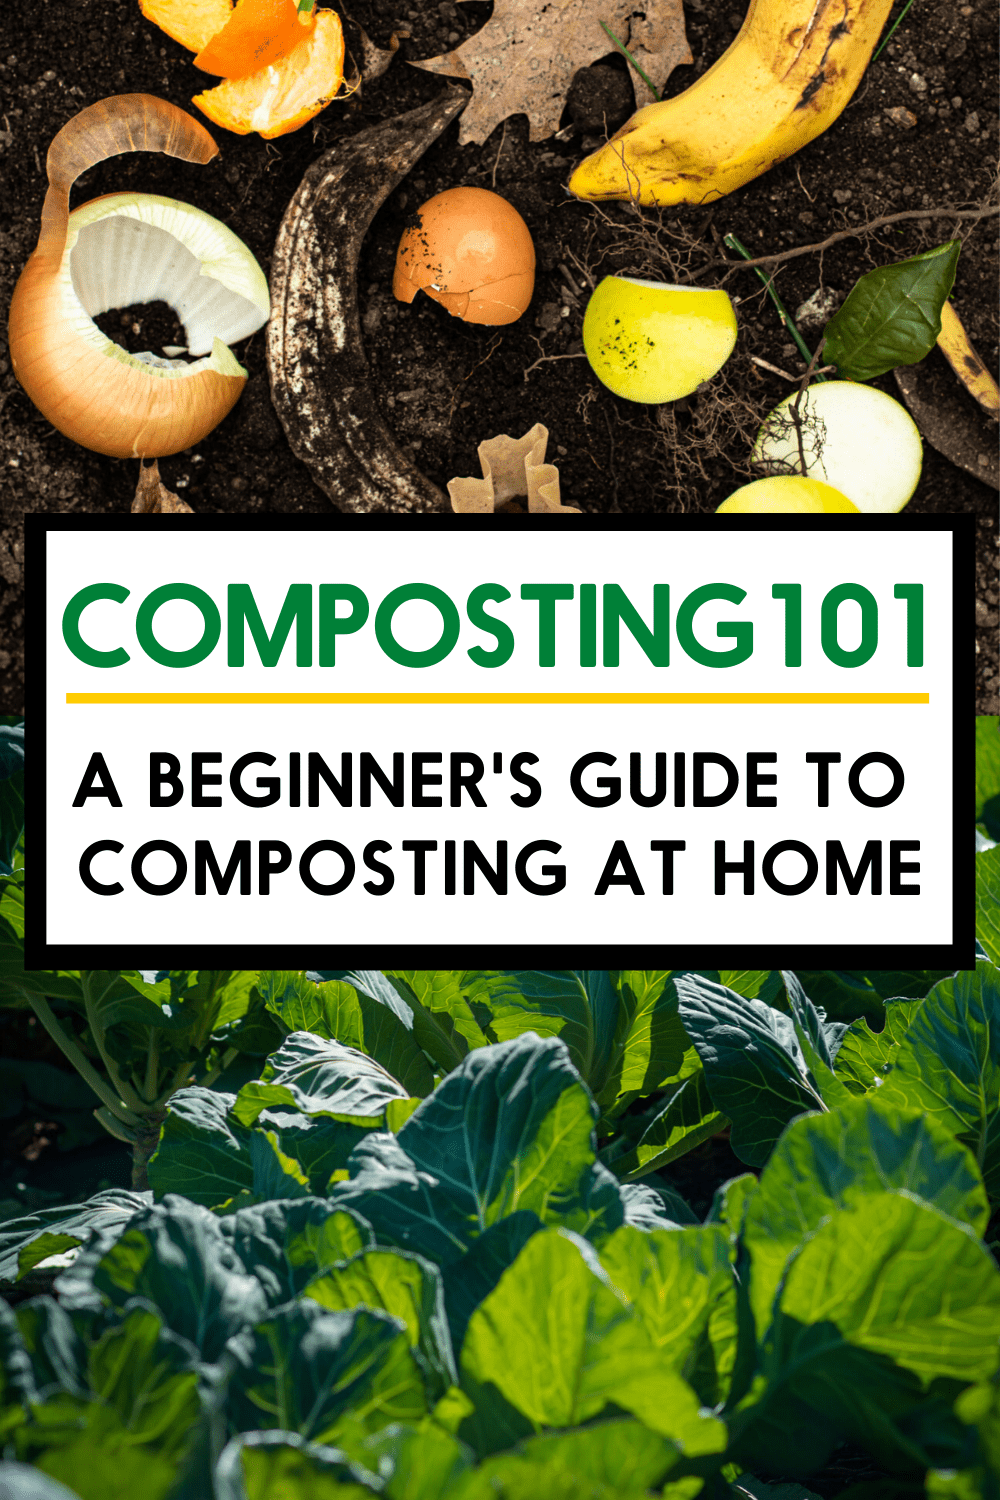 A Beginner’s Guide on How to Compost